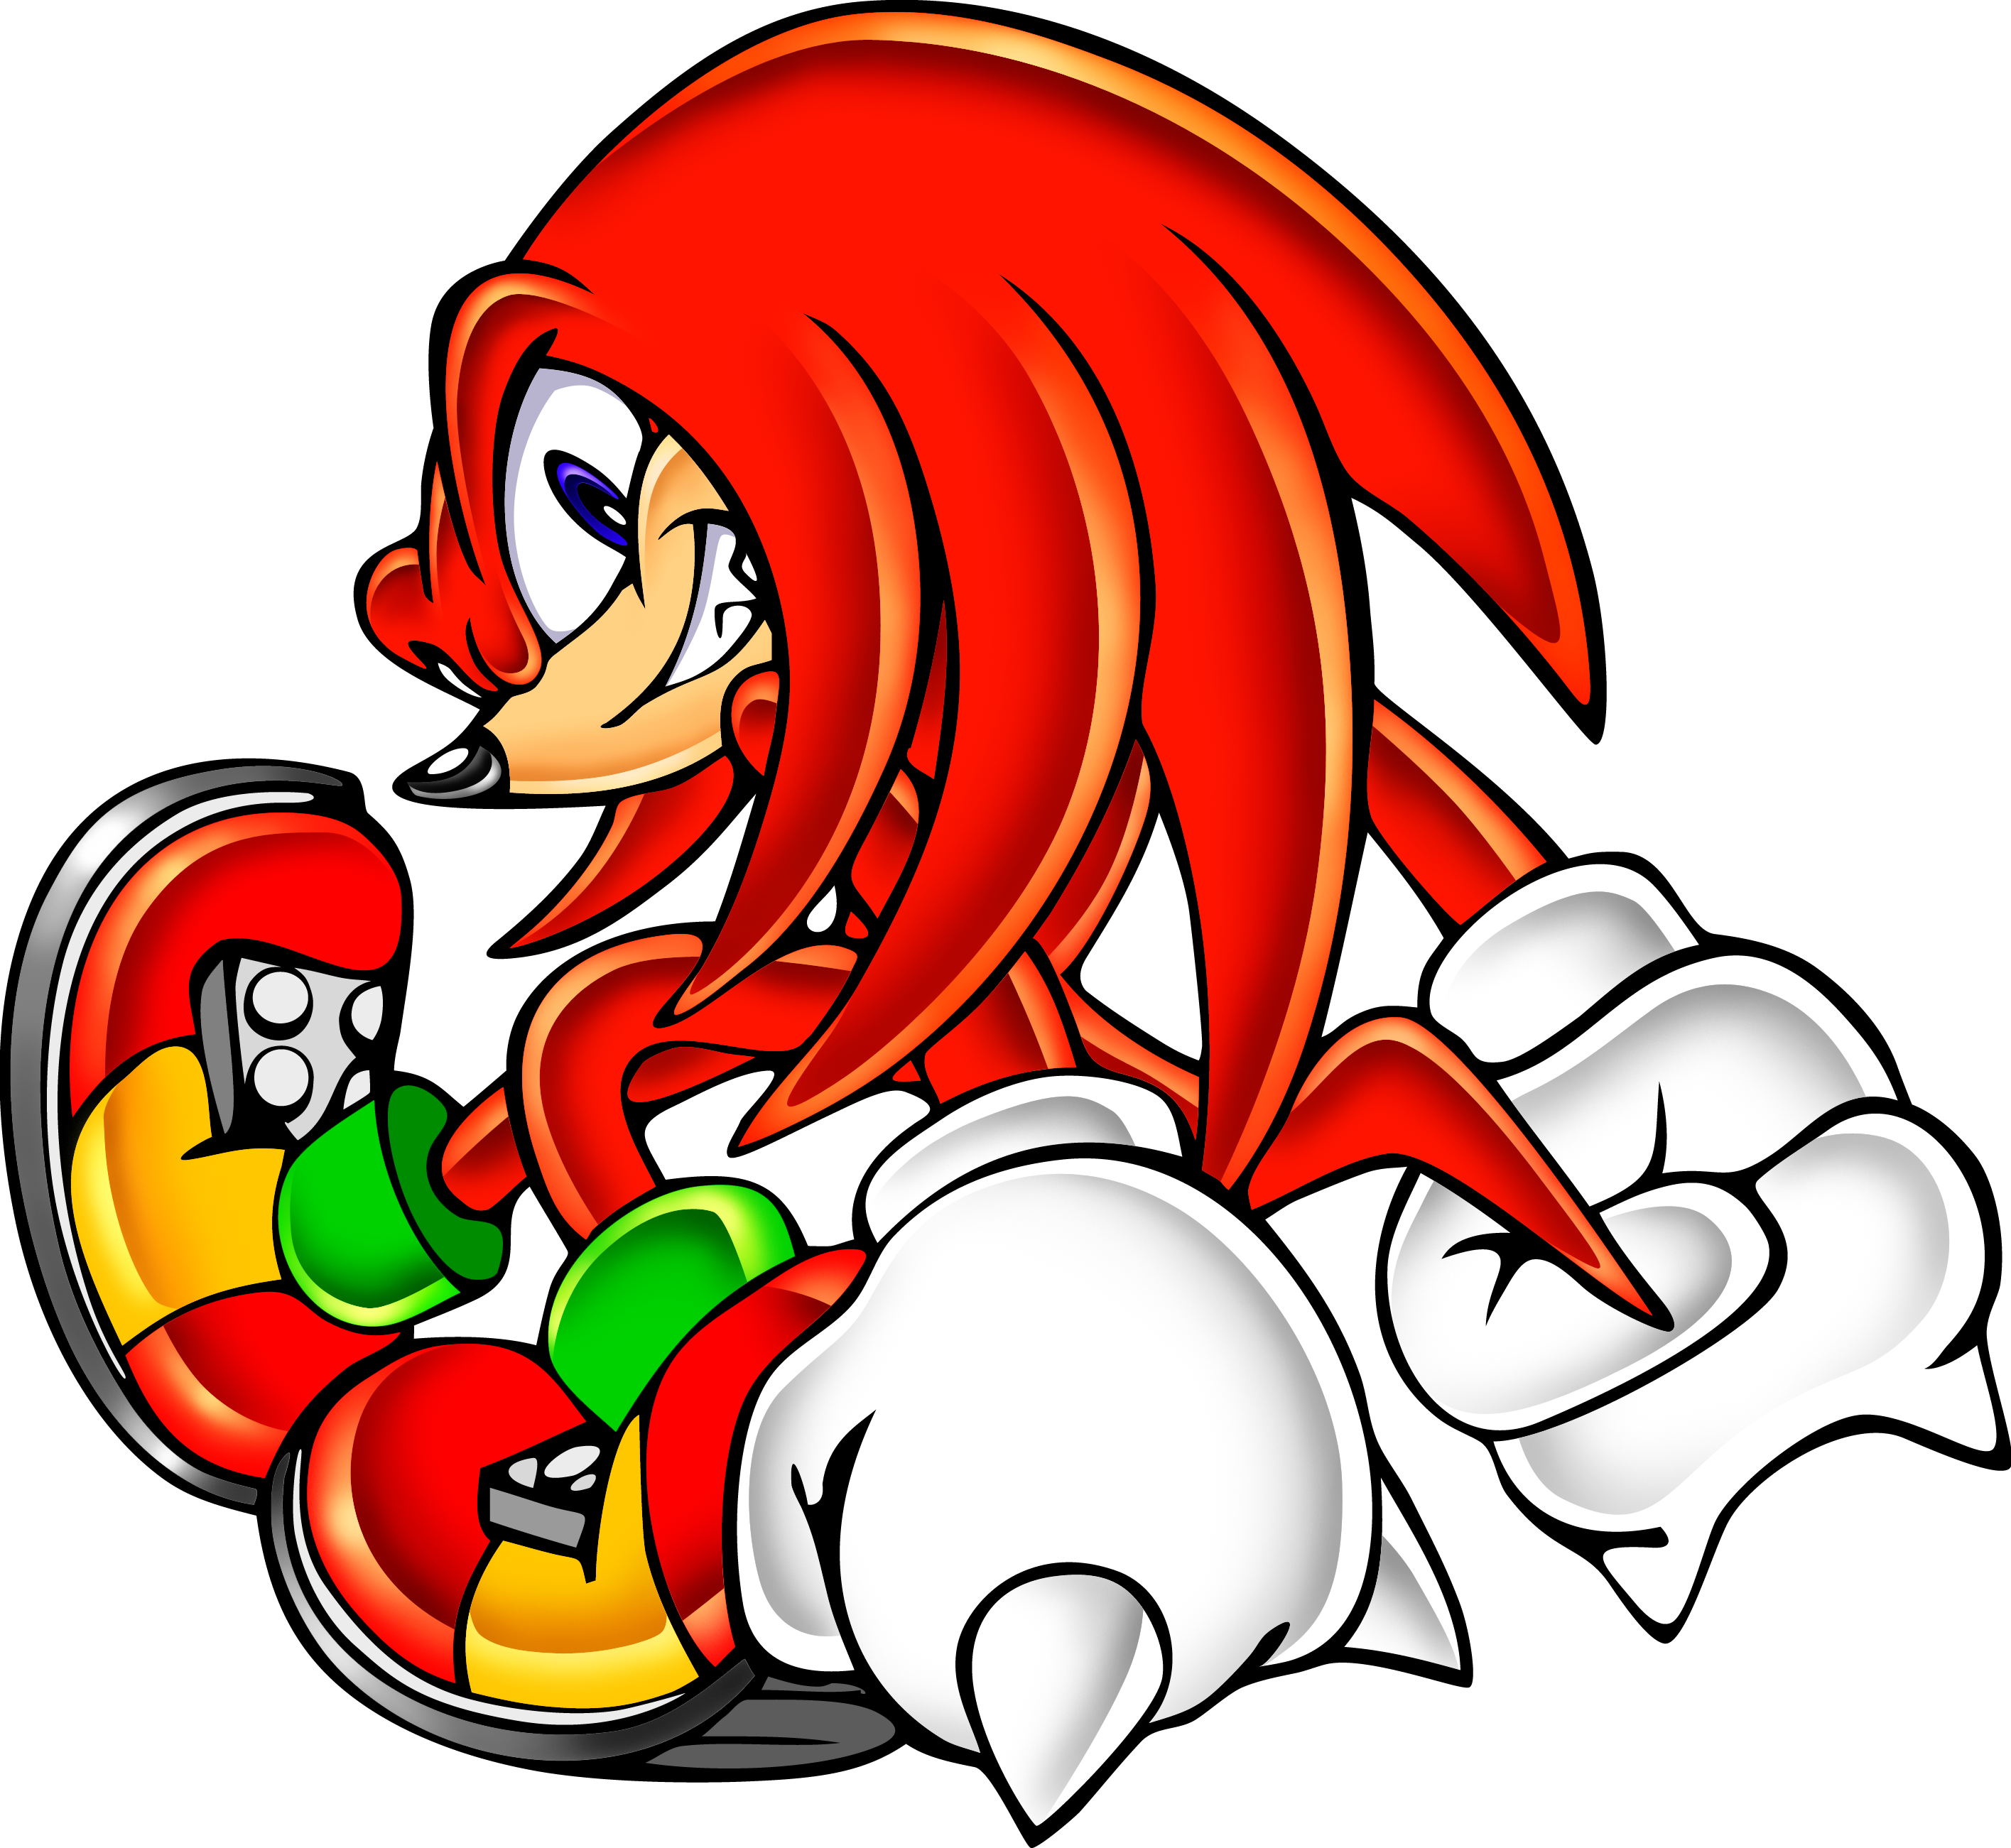 Knuckles_Sonic_Adventure.png